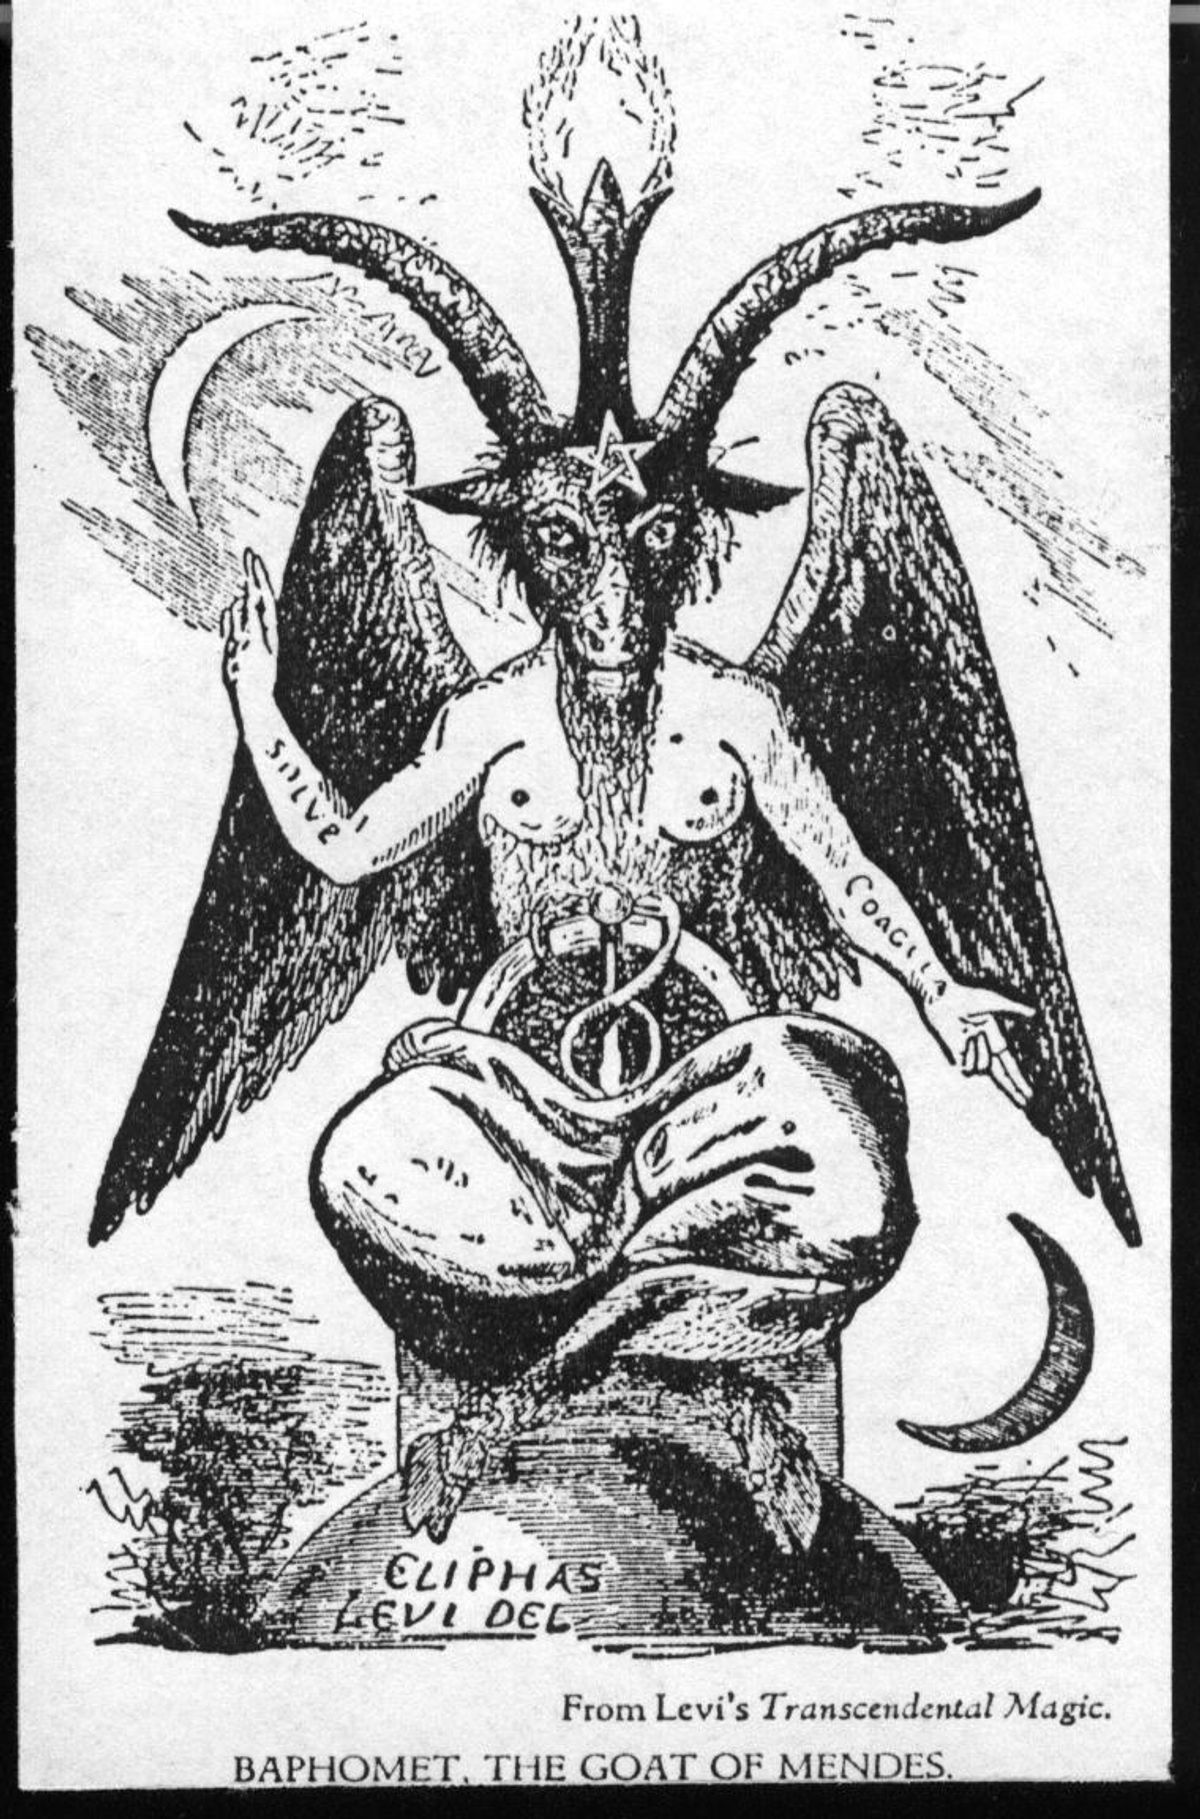 The Iconography of Baphomet